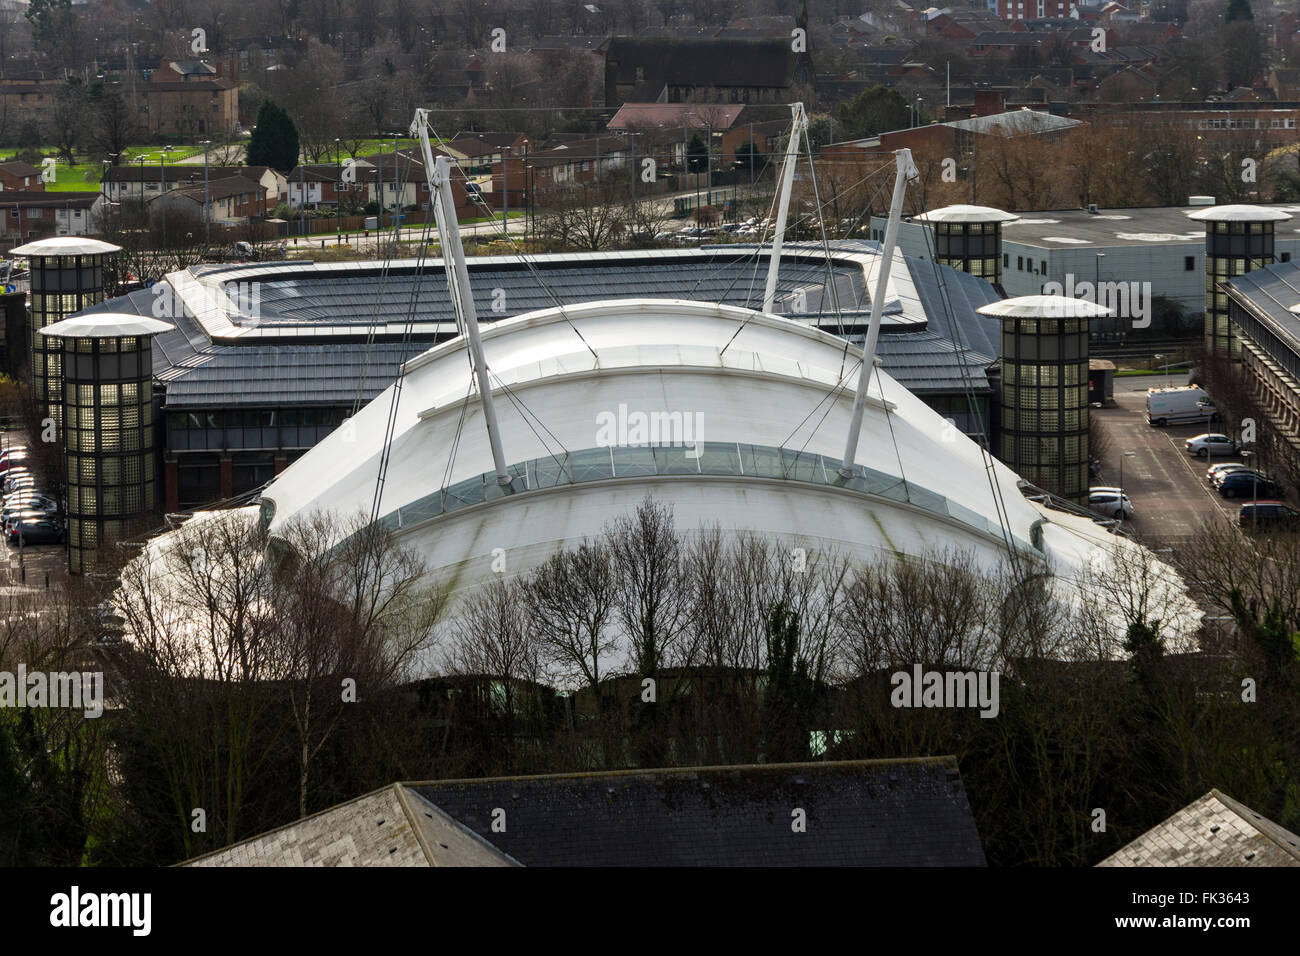 The roof of the Amenities Building at the Inland Revenue centre.  From Nottingham Castle, Nottingham, England, UK Stock Photo